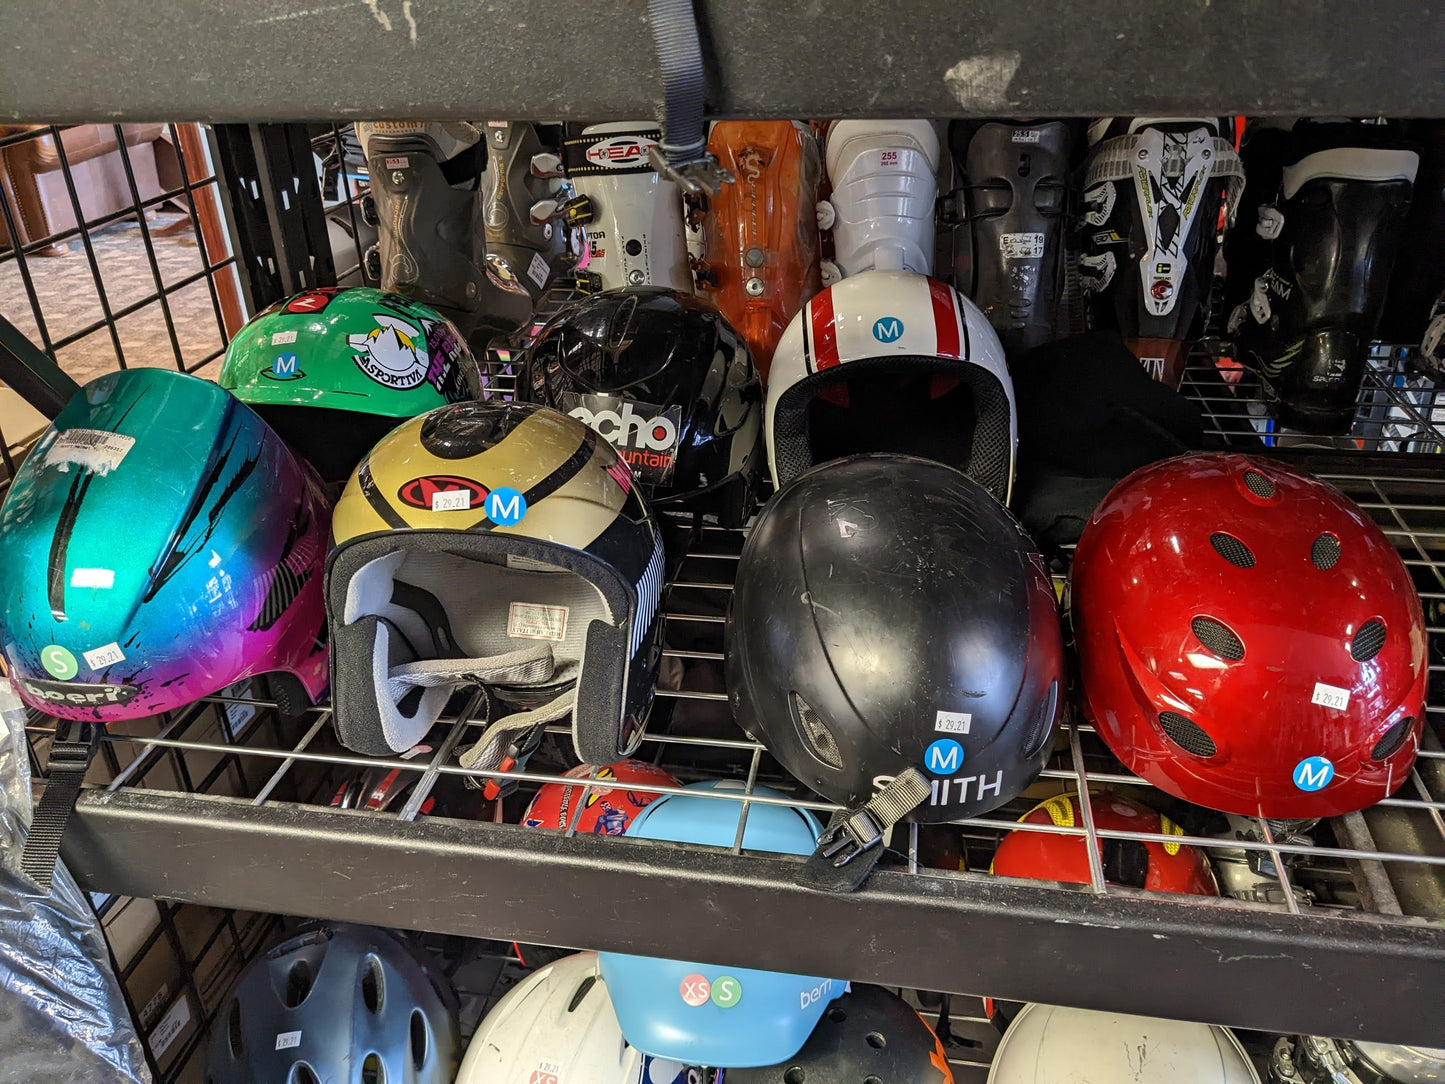 Ski Helmets, Assorted Sizes, Assorted Colors, Used